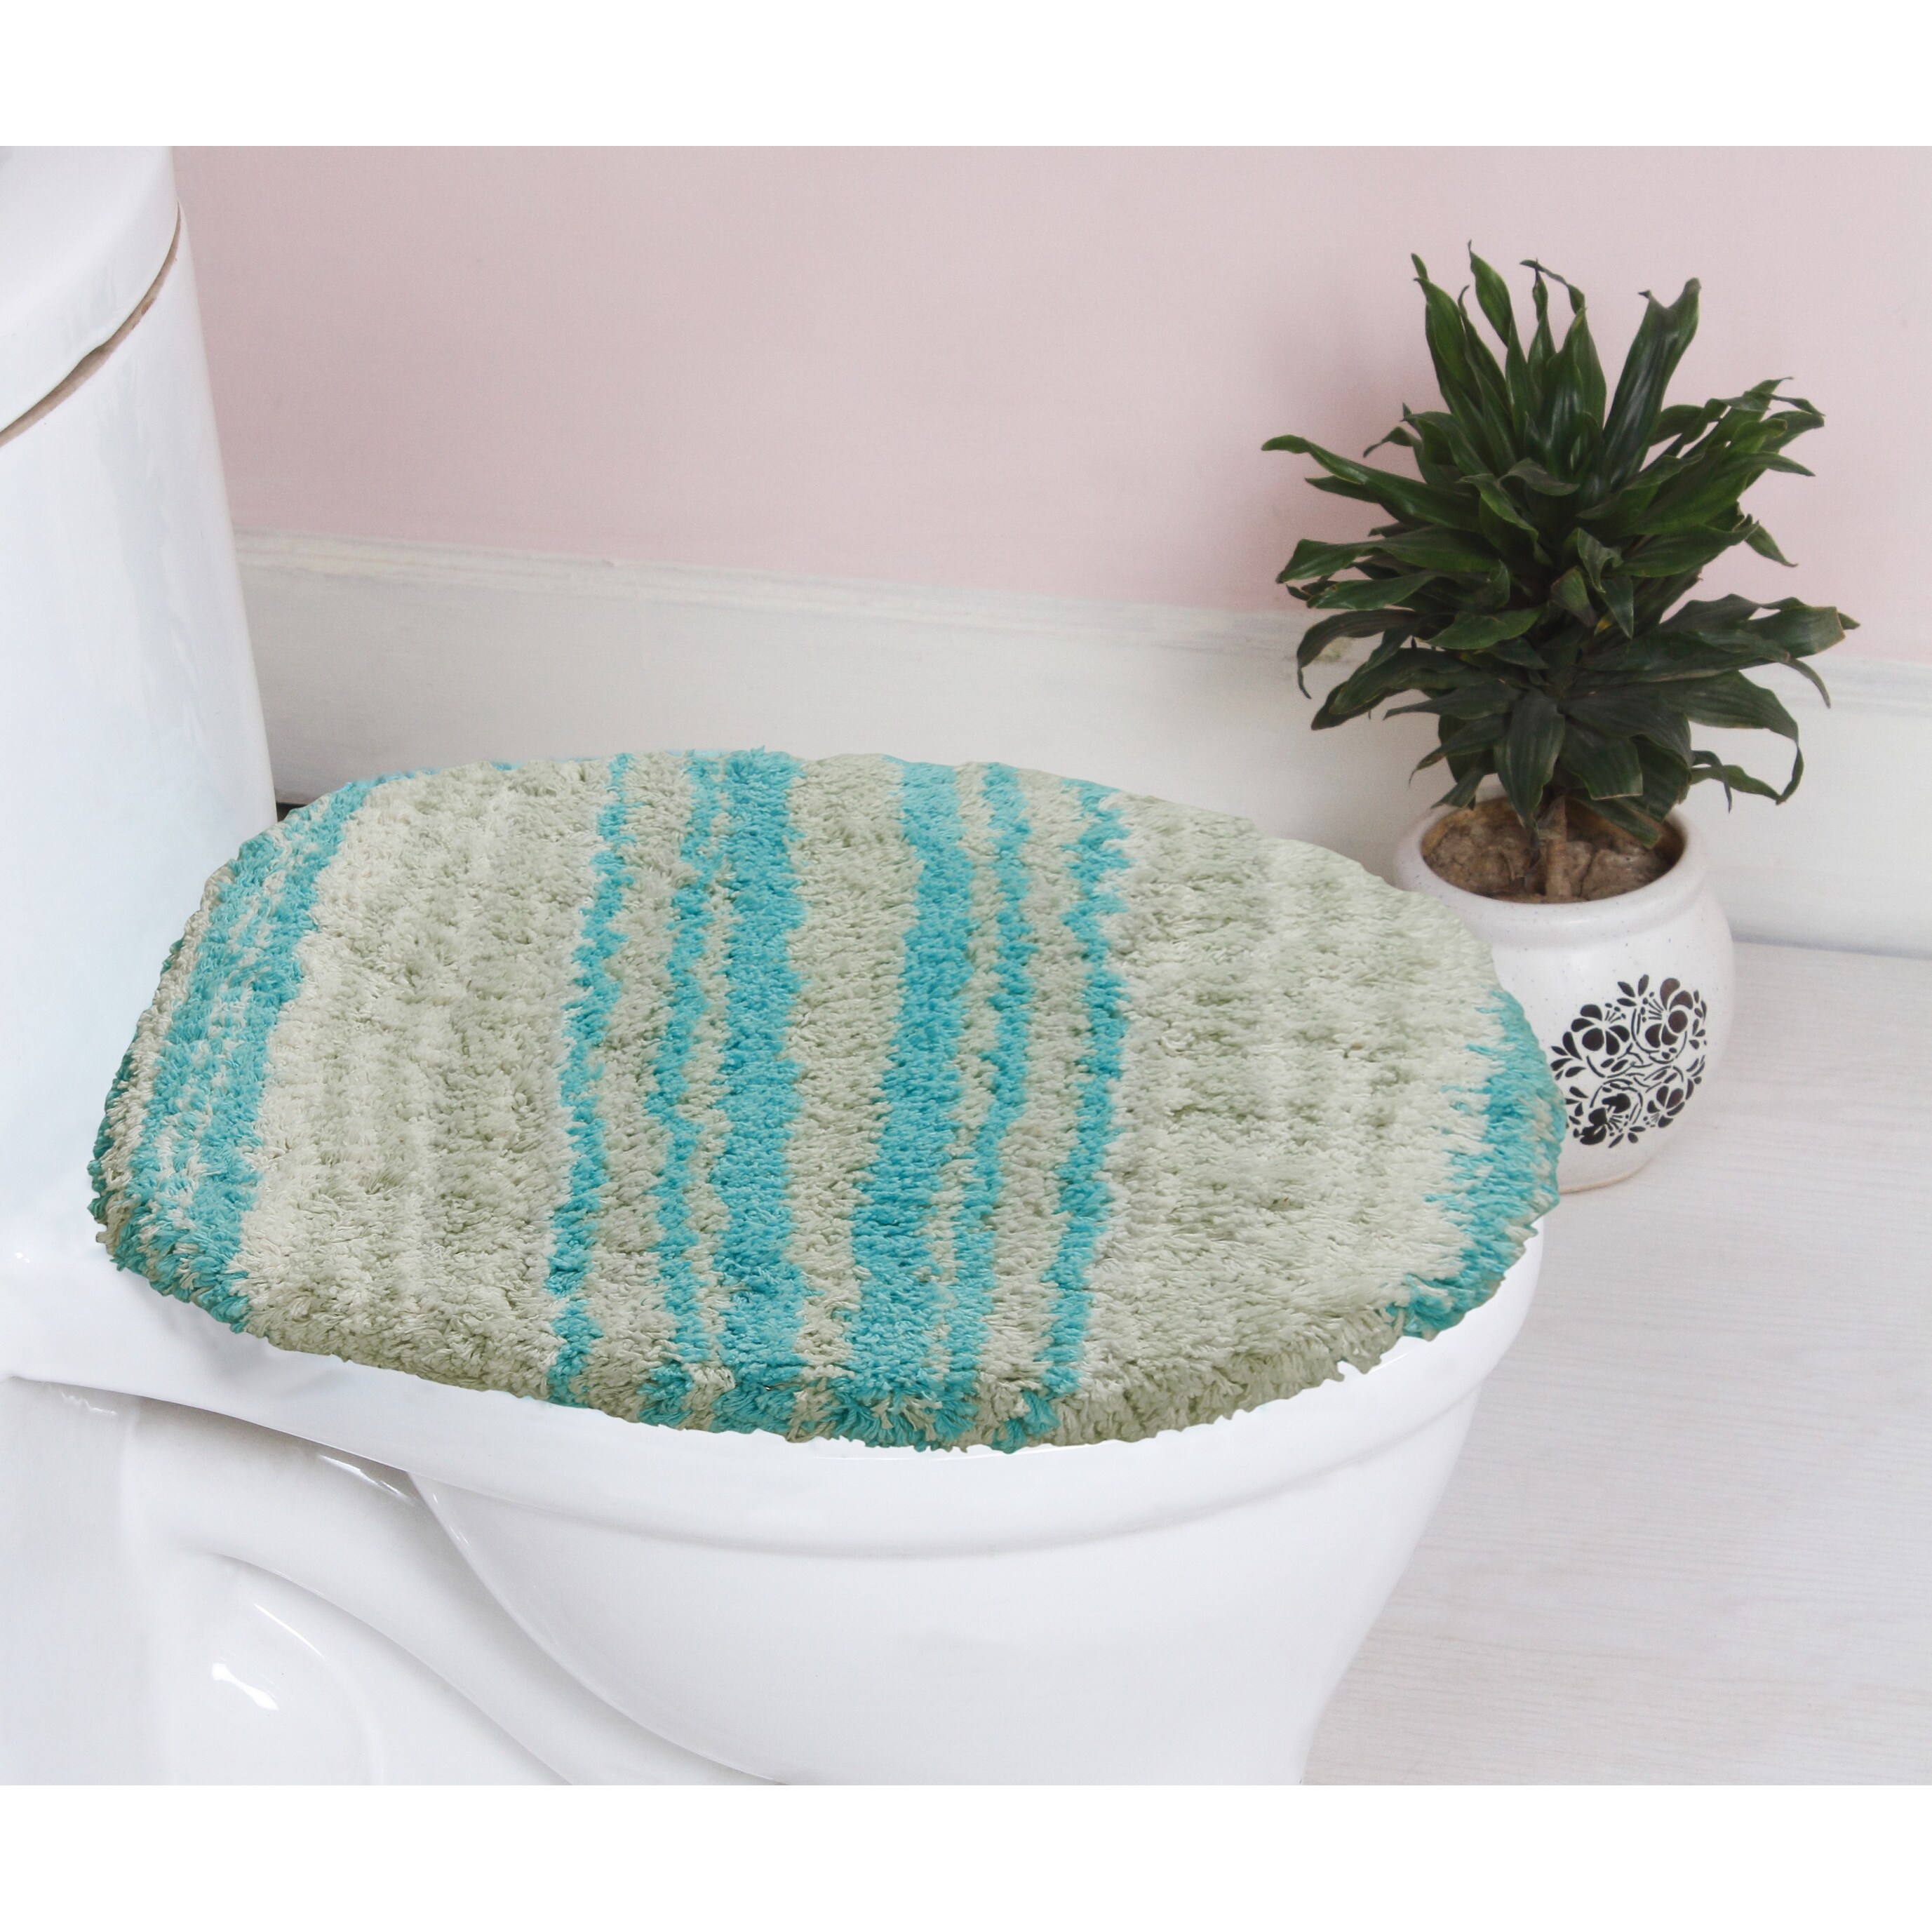 Home Weavers Inc Bell Flower Bathroom Rug, Cotton Soft, Water Absorbent Bath Rug, Non Slip Shower Rug Machine Washable 3 Piece Set with Runner - Turquoise